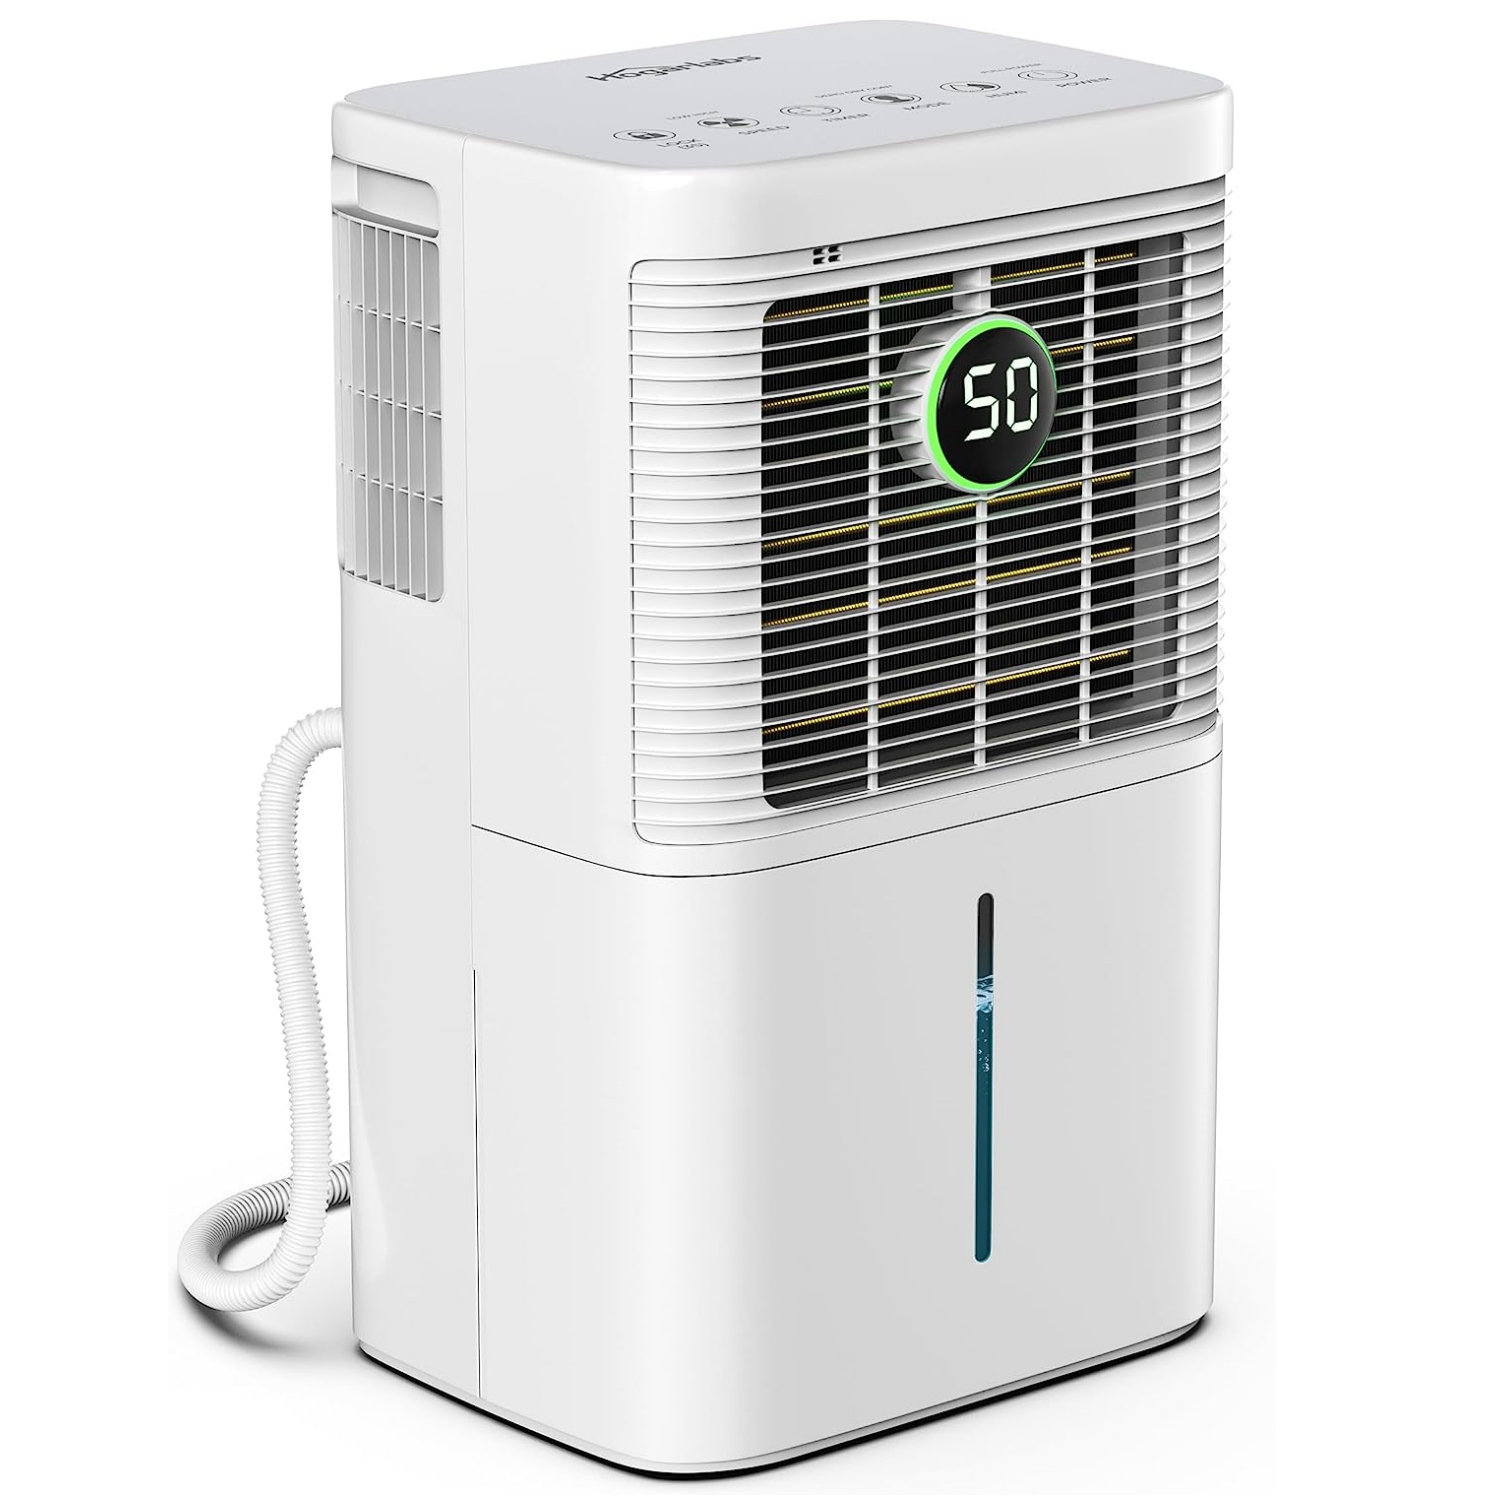 25 Pt. 1500 Sq. ft Dehumidifiers in White with Drain Hose and Water Tank, Auto or Manual Drainage for Home and Basements